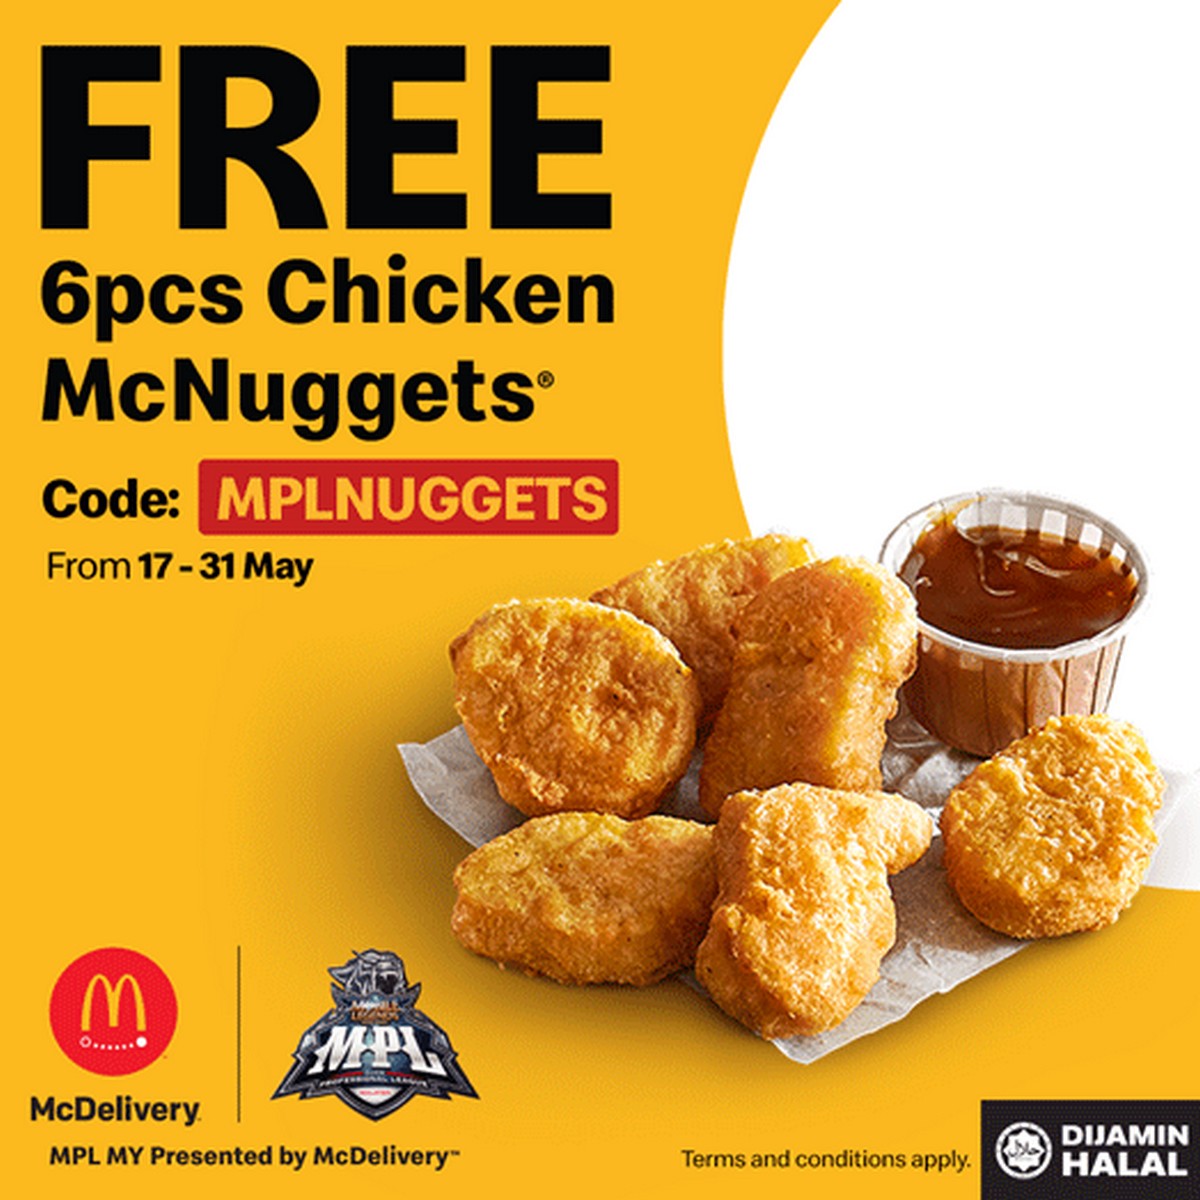 Get The McDonald's FREE 6pcs Chicken McNuggets with this Promo Code ...